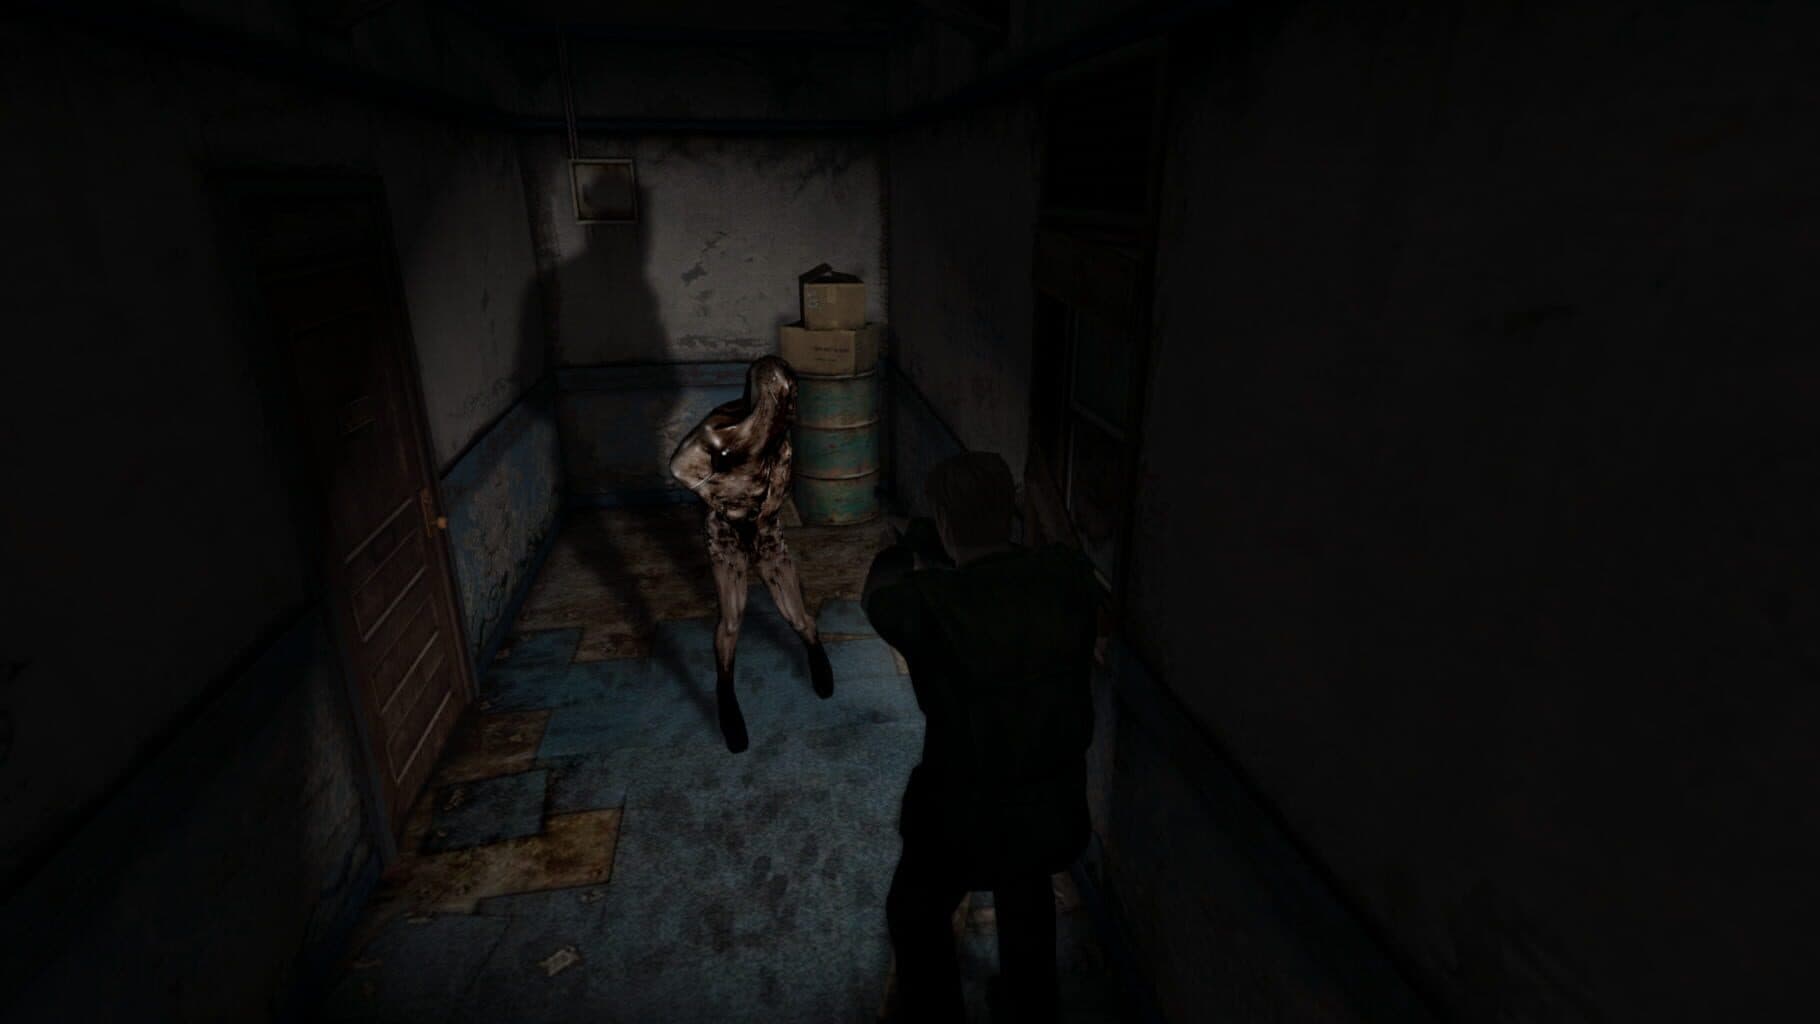 Silent Hill 2 Image